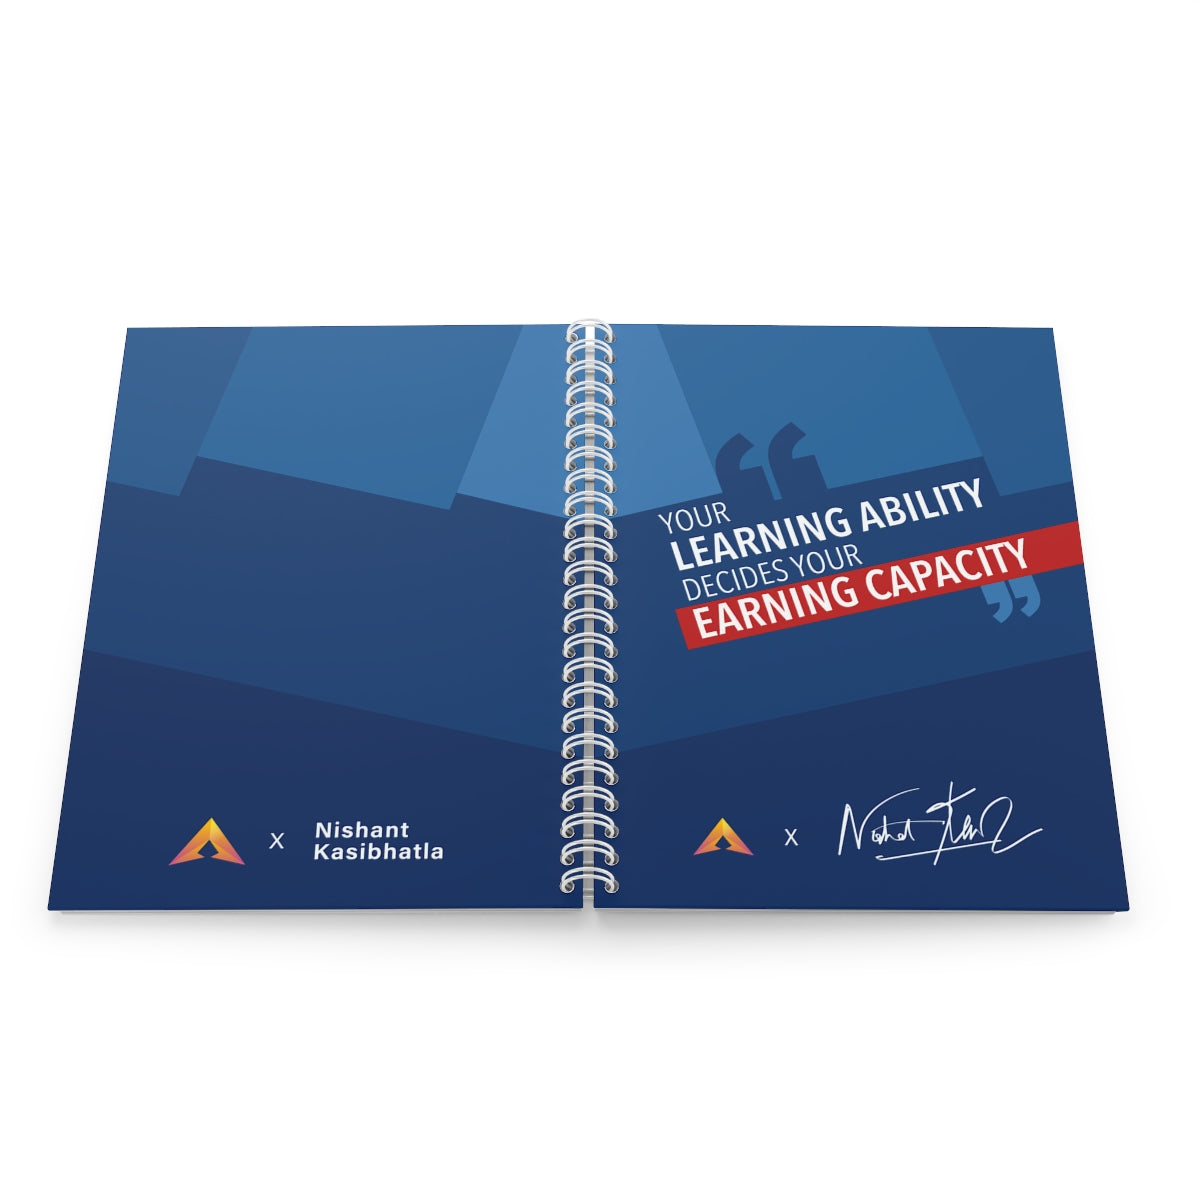 Nishant "Your Learning Ability" Notebook (Limited Edition)